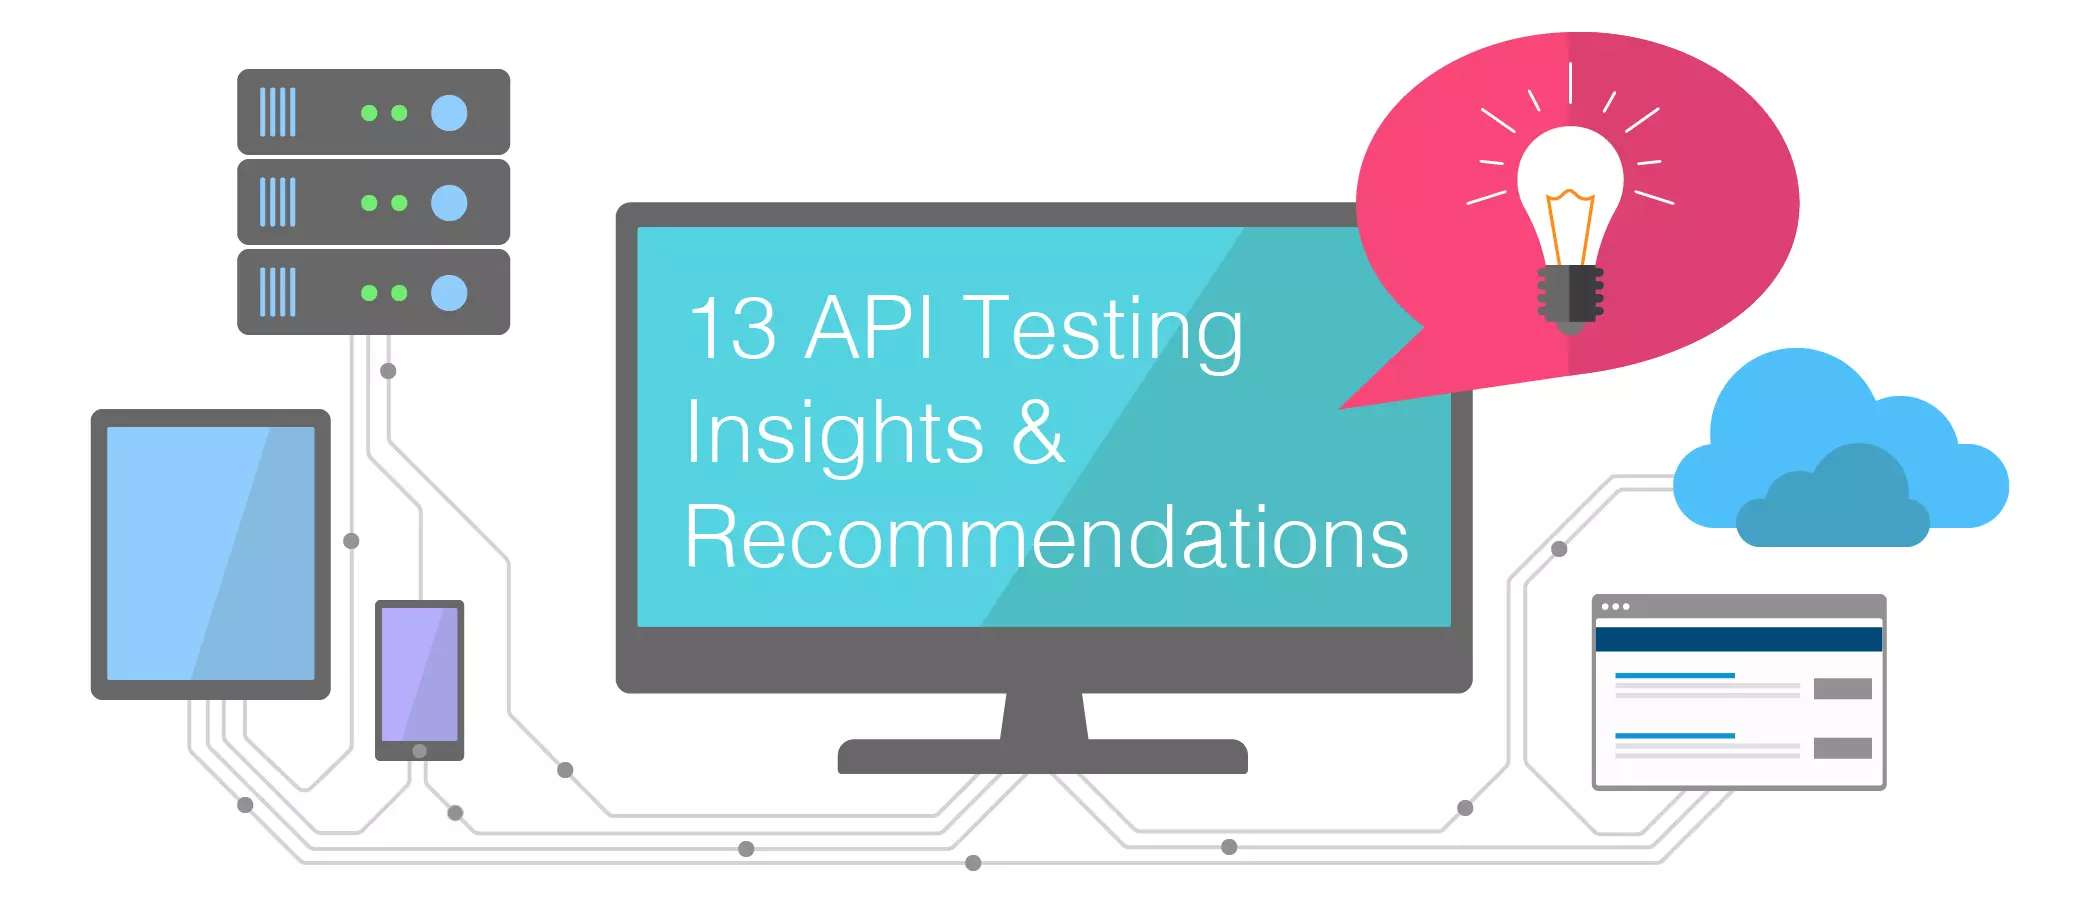 A Micro-Manifesto on API Testing to Inspire and Recharge Your Organization